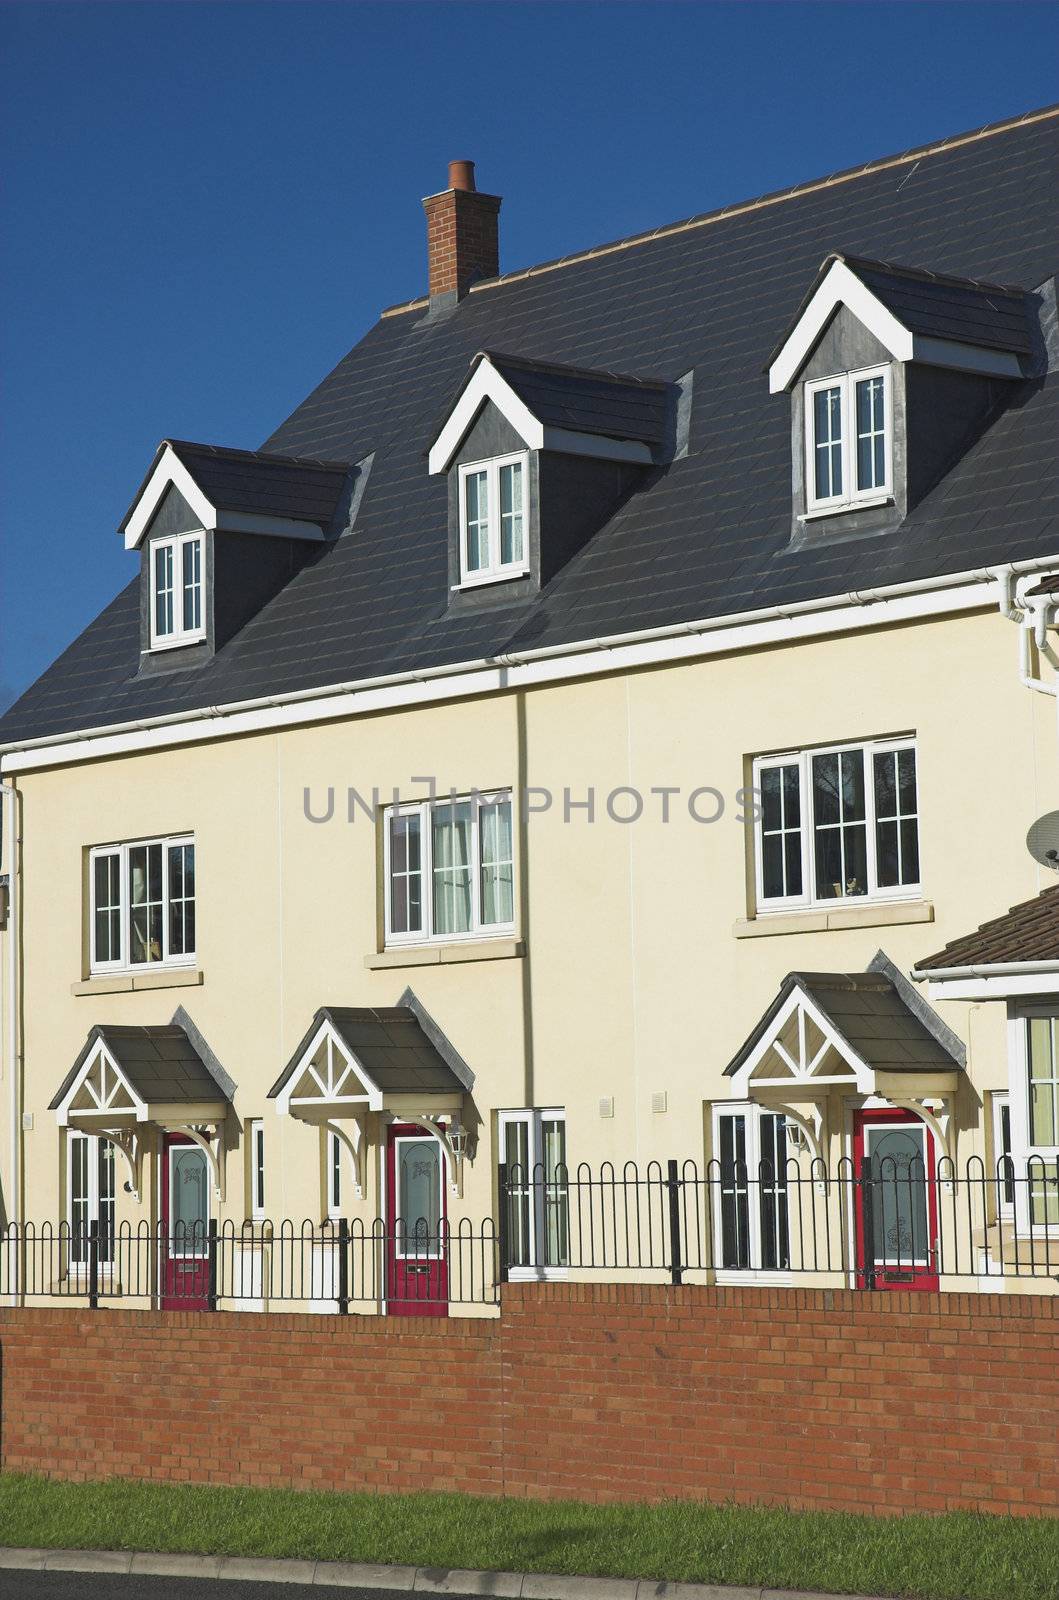 New terraced style housing in a residential estate in the United Kingdom.